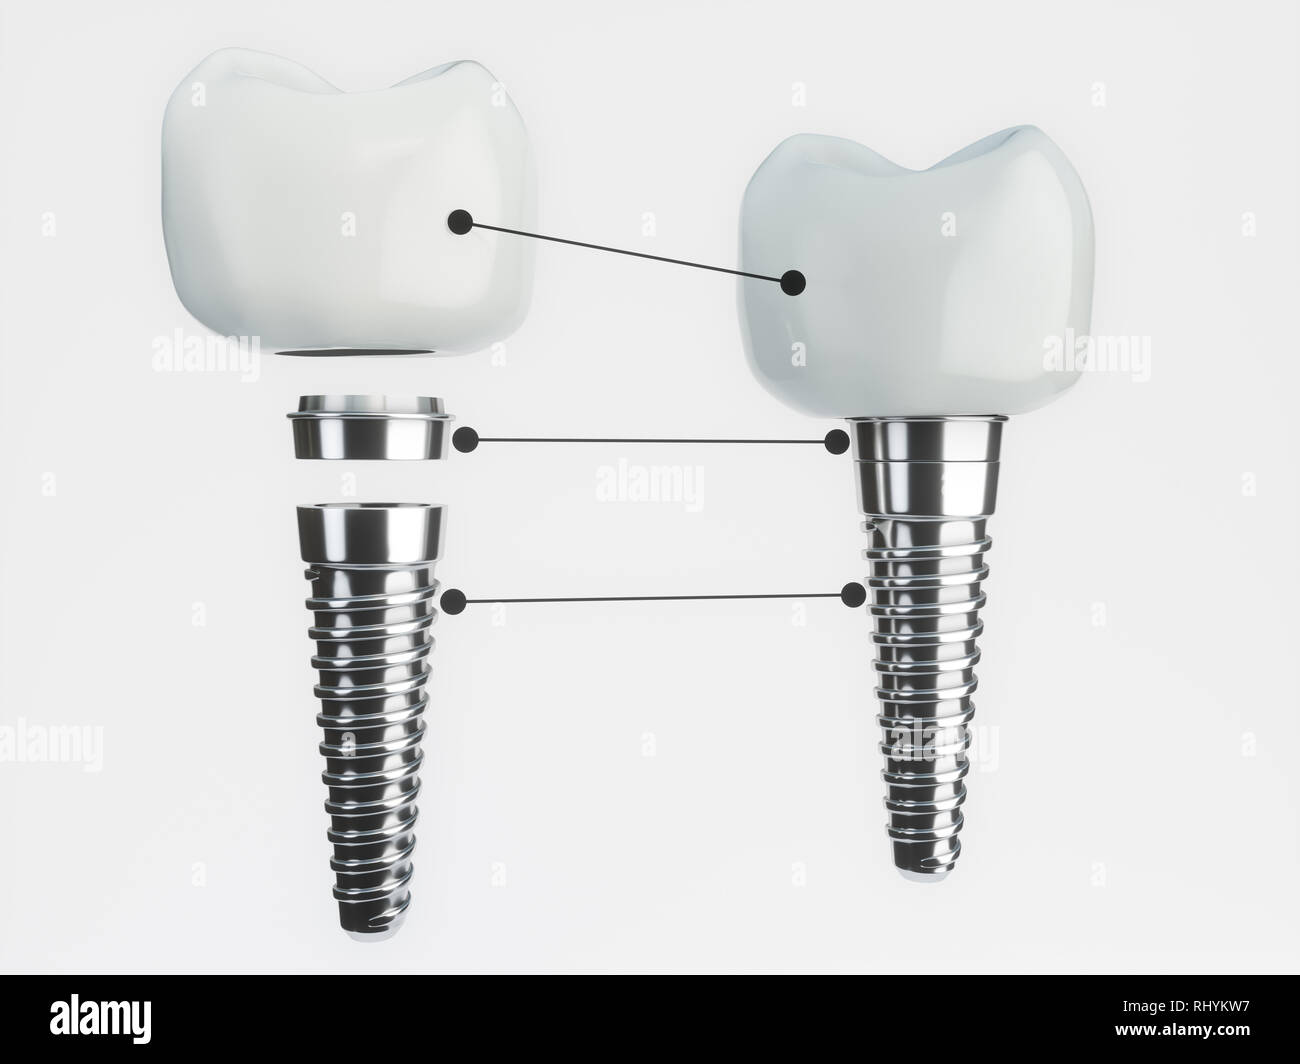 Tooth implant disassembled - 3D Rendering Stock Photo